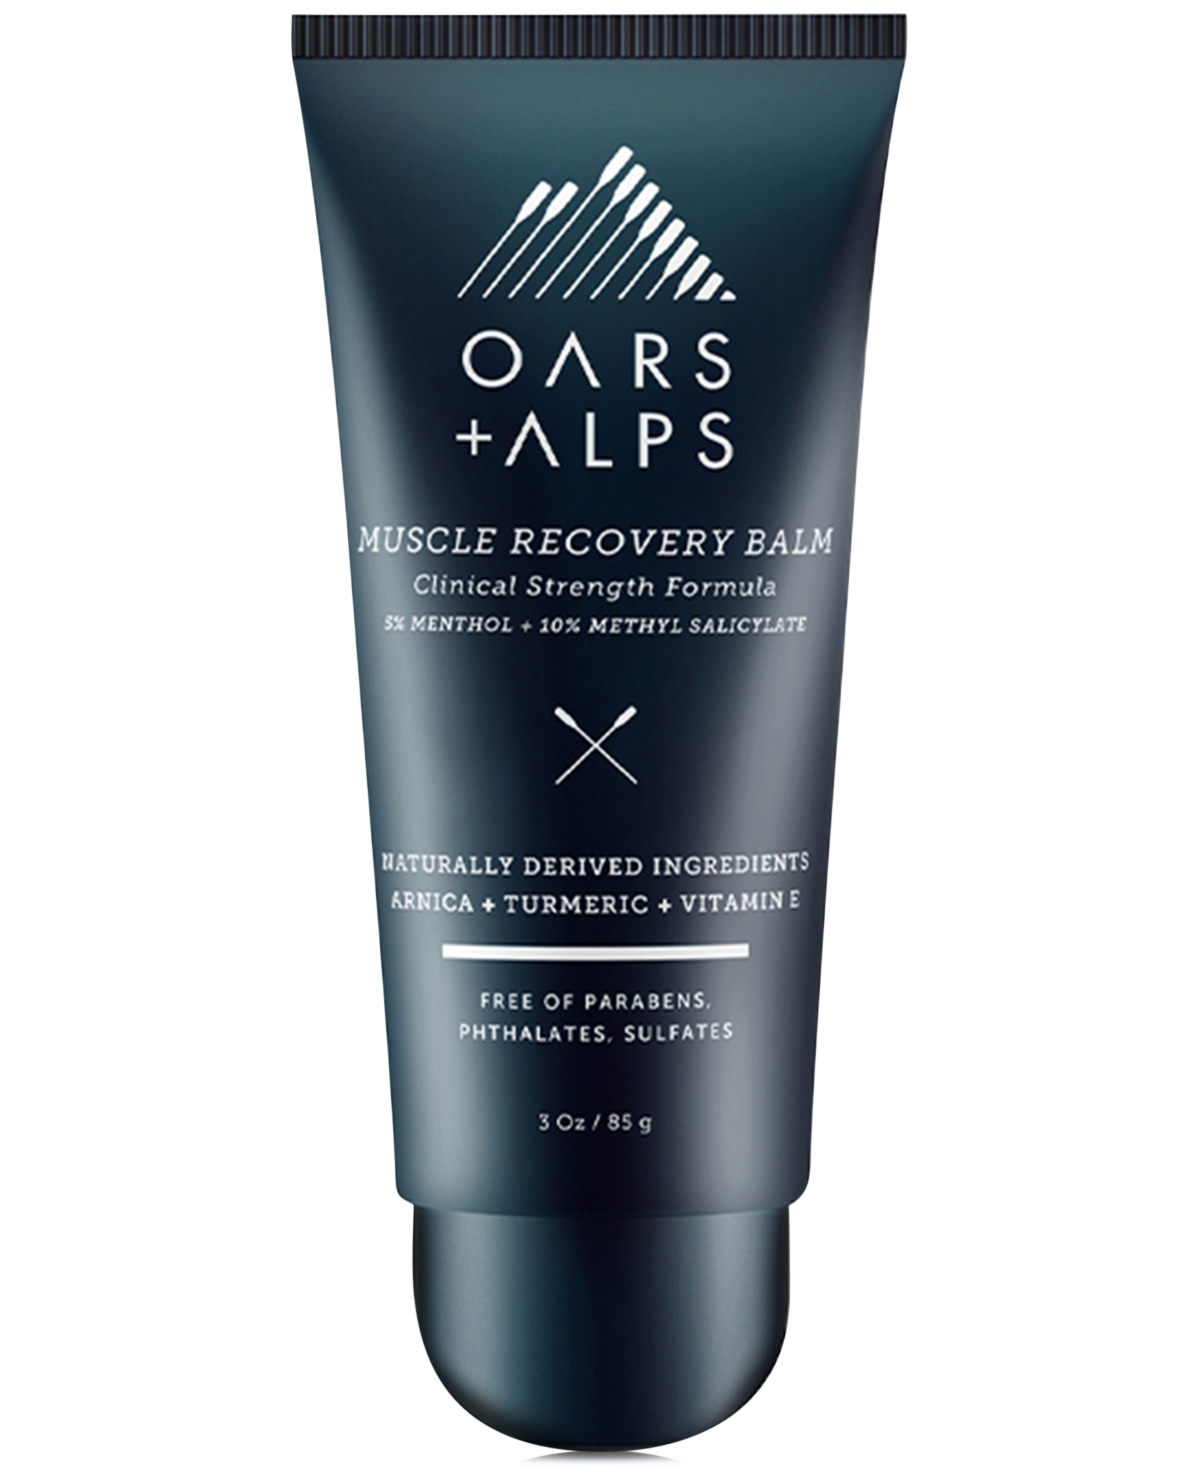 Oars + Alps Muscle Recovery Balm, 3oz